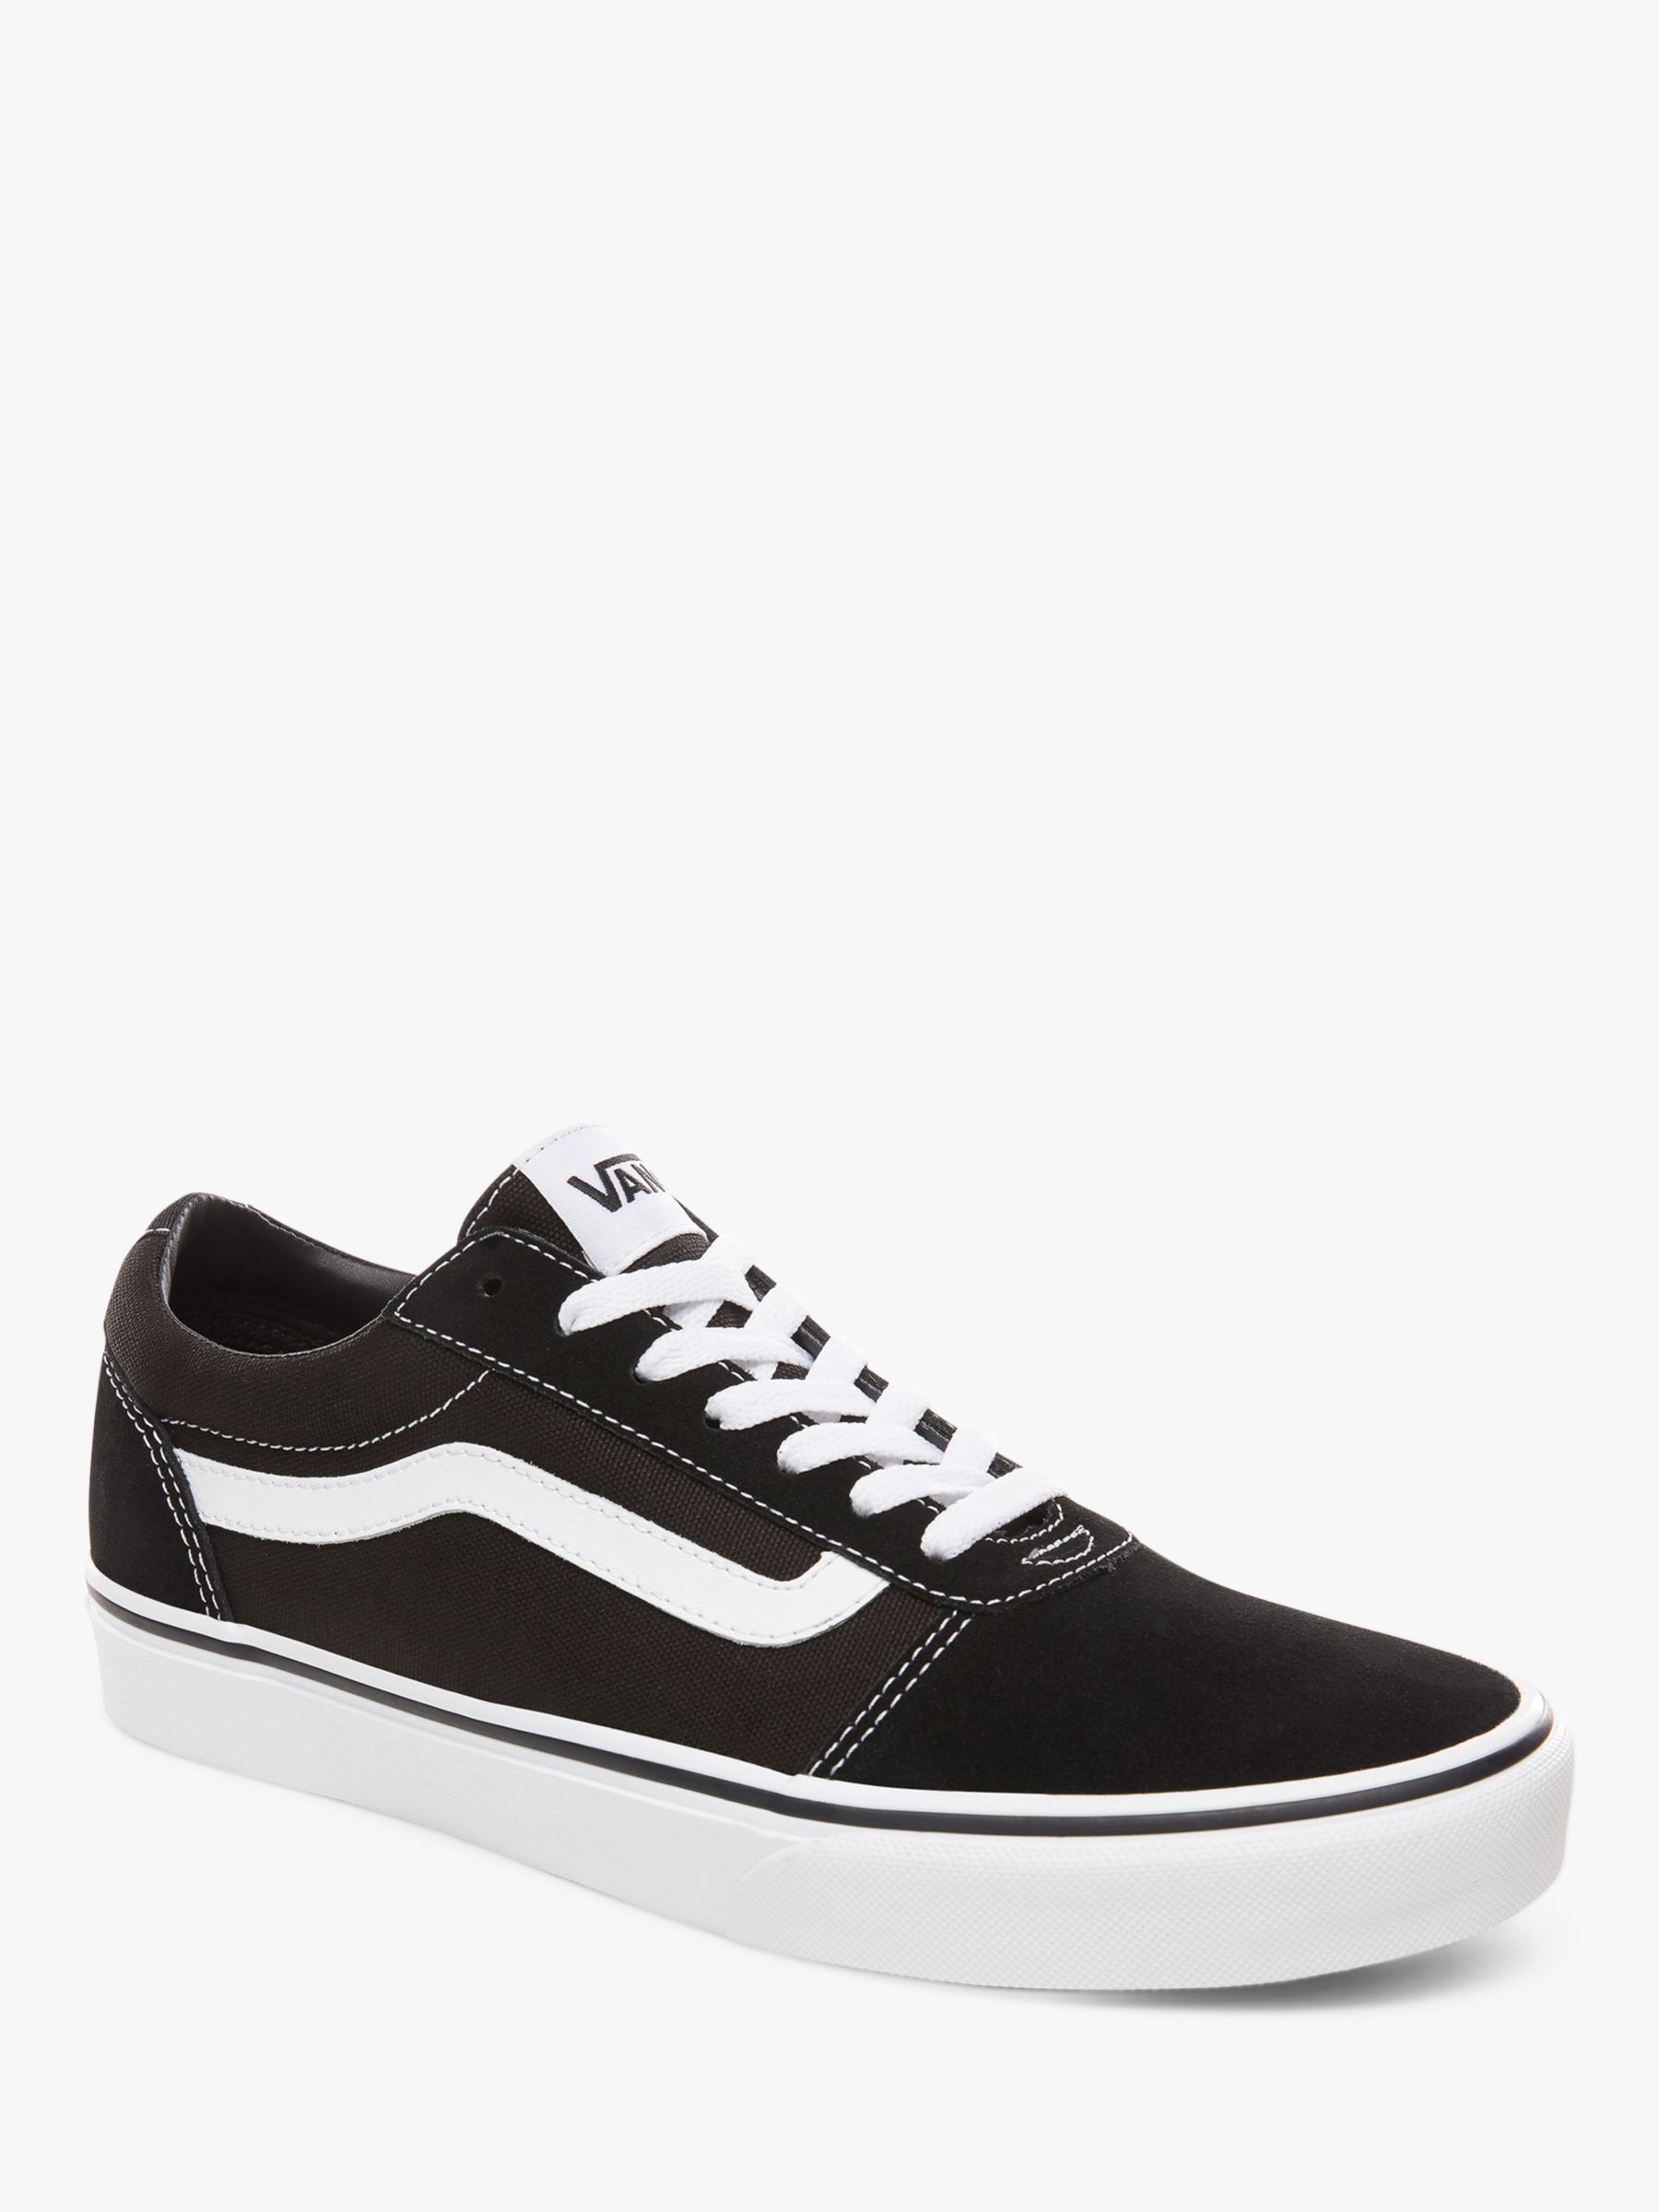 vans black and white mens shoes